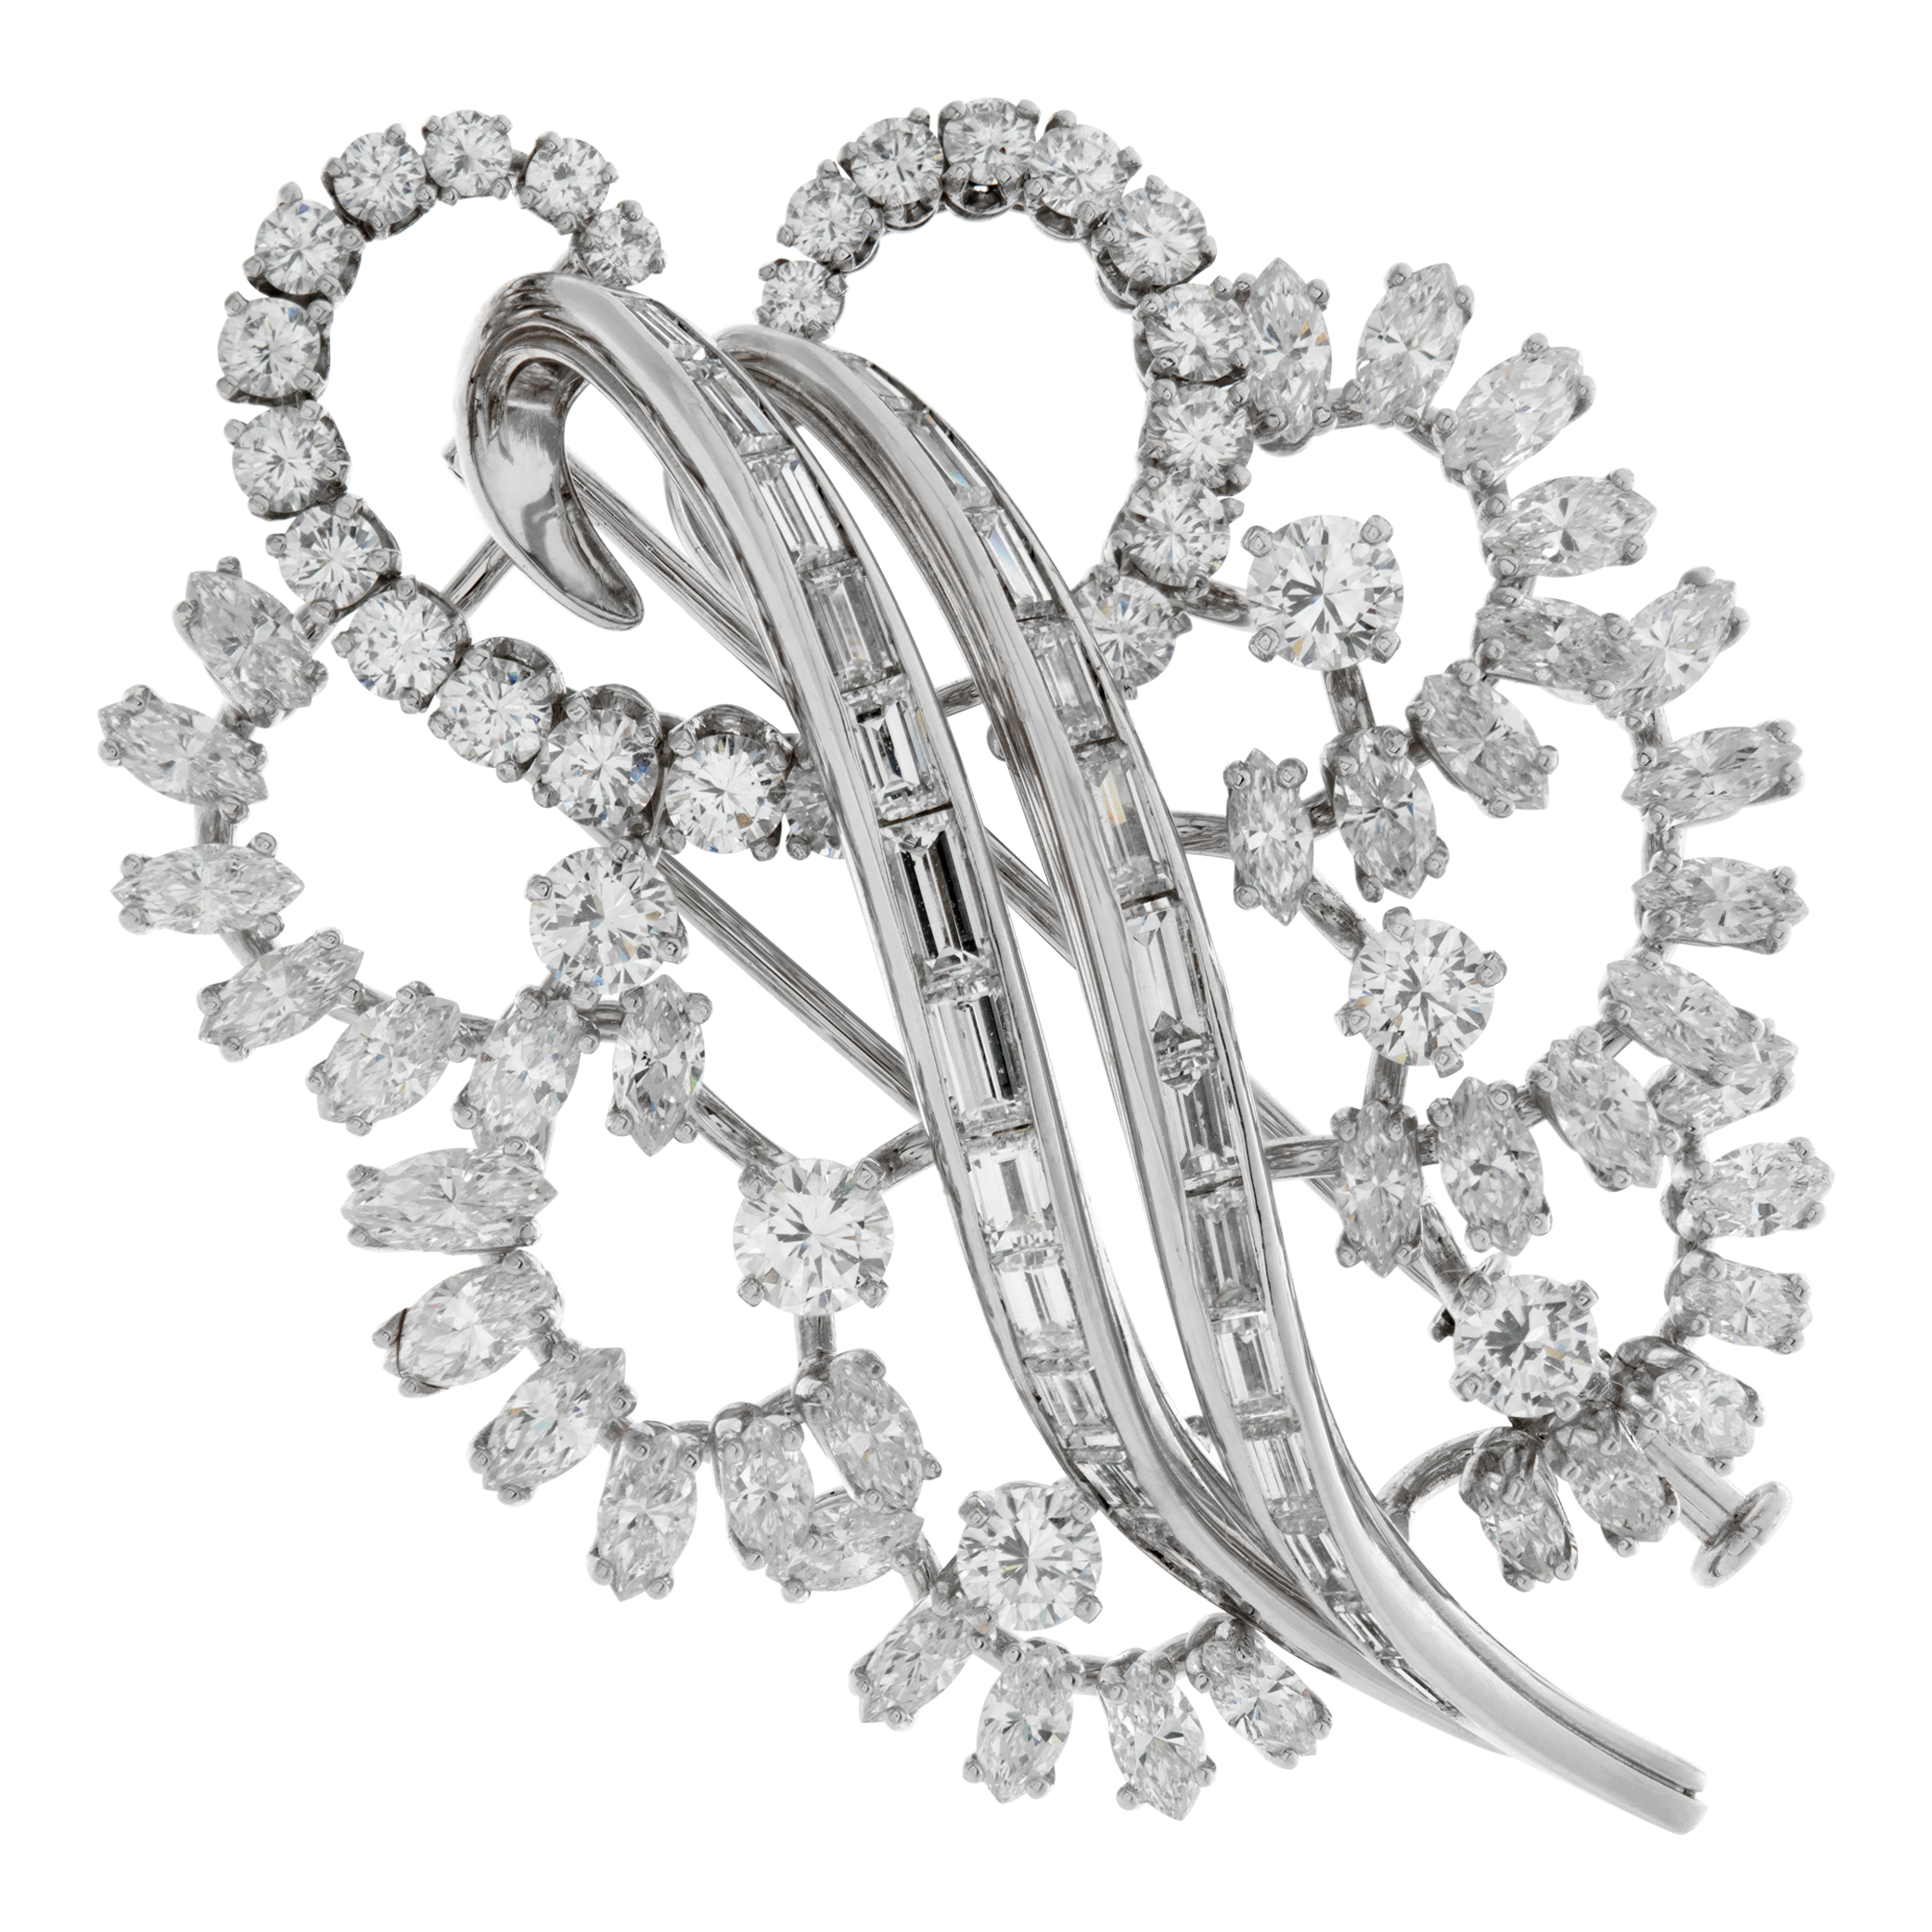 Baguette, Marquise & Round Brilliant Cut Diamonds Brooch In 18k White Gold. Approx. 3.00 Carats. image 1